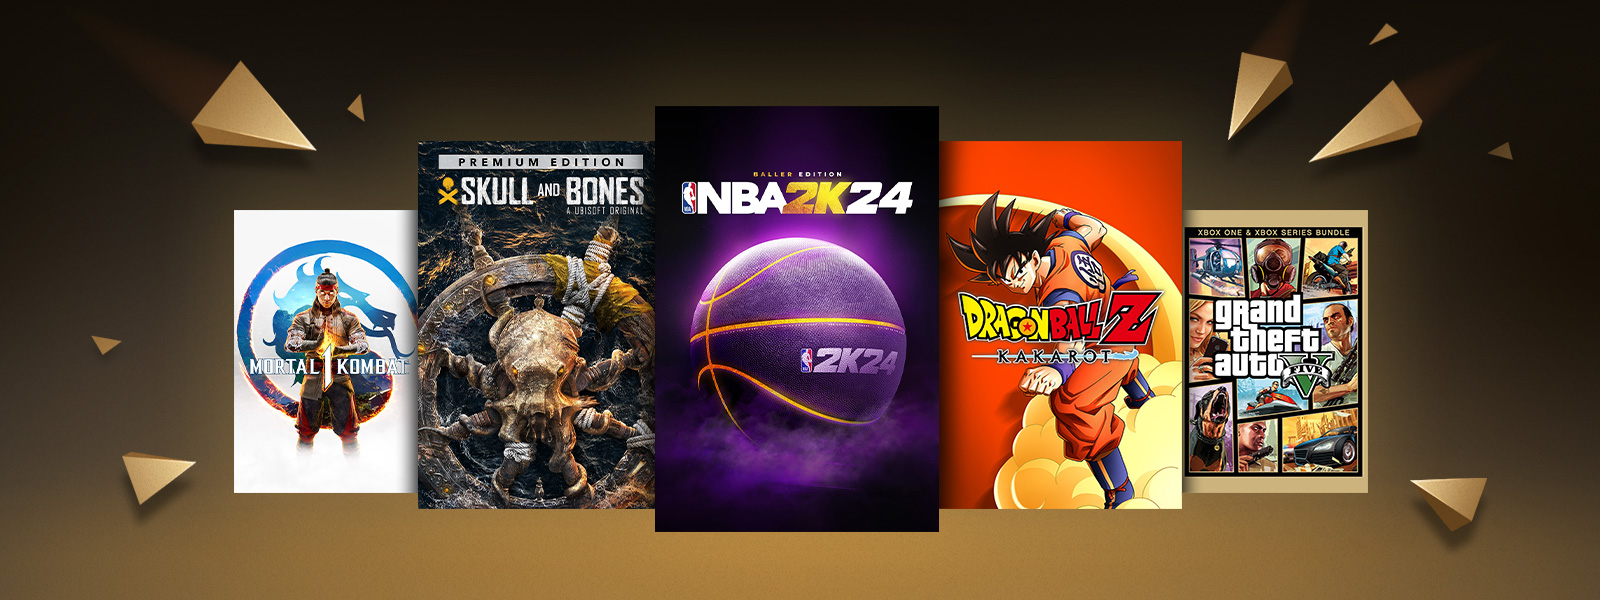 A lockup of games that are part of the sale.